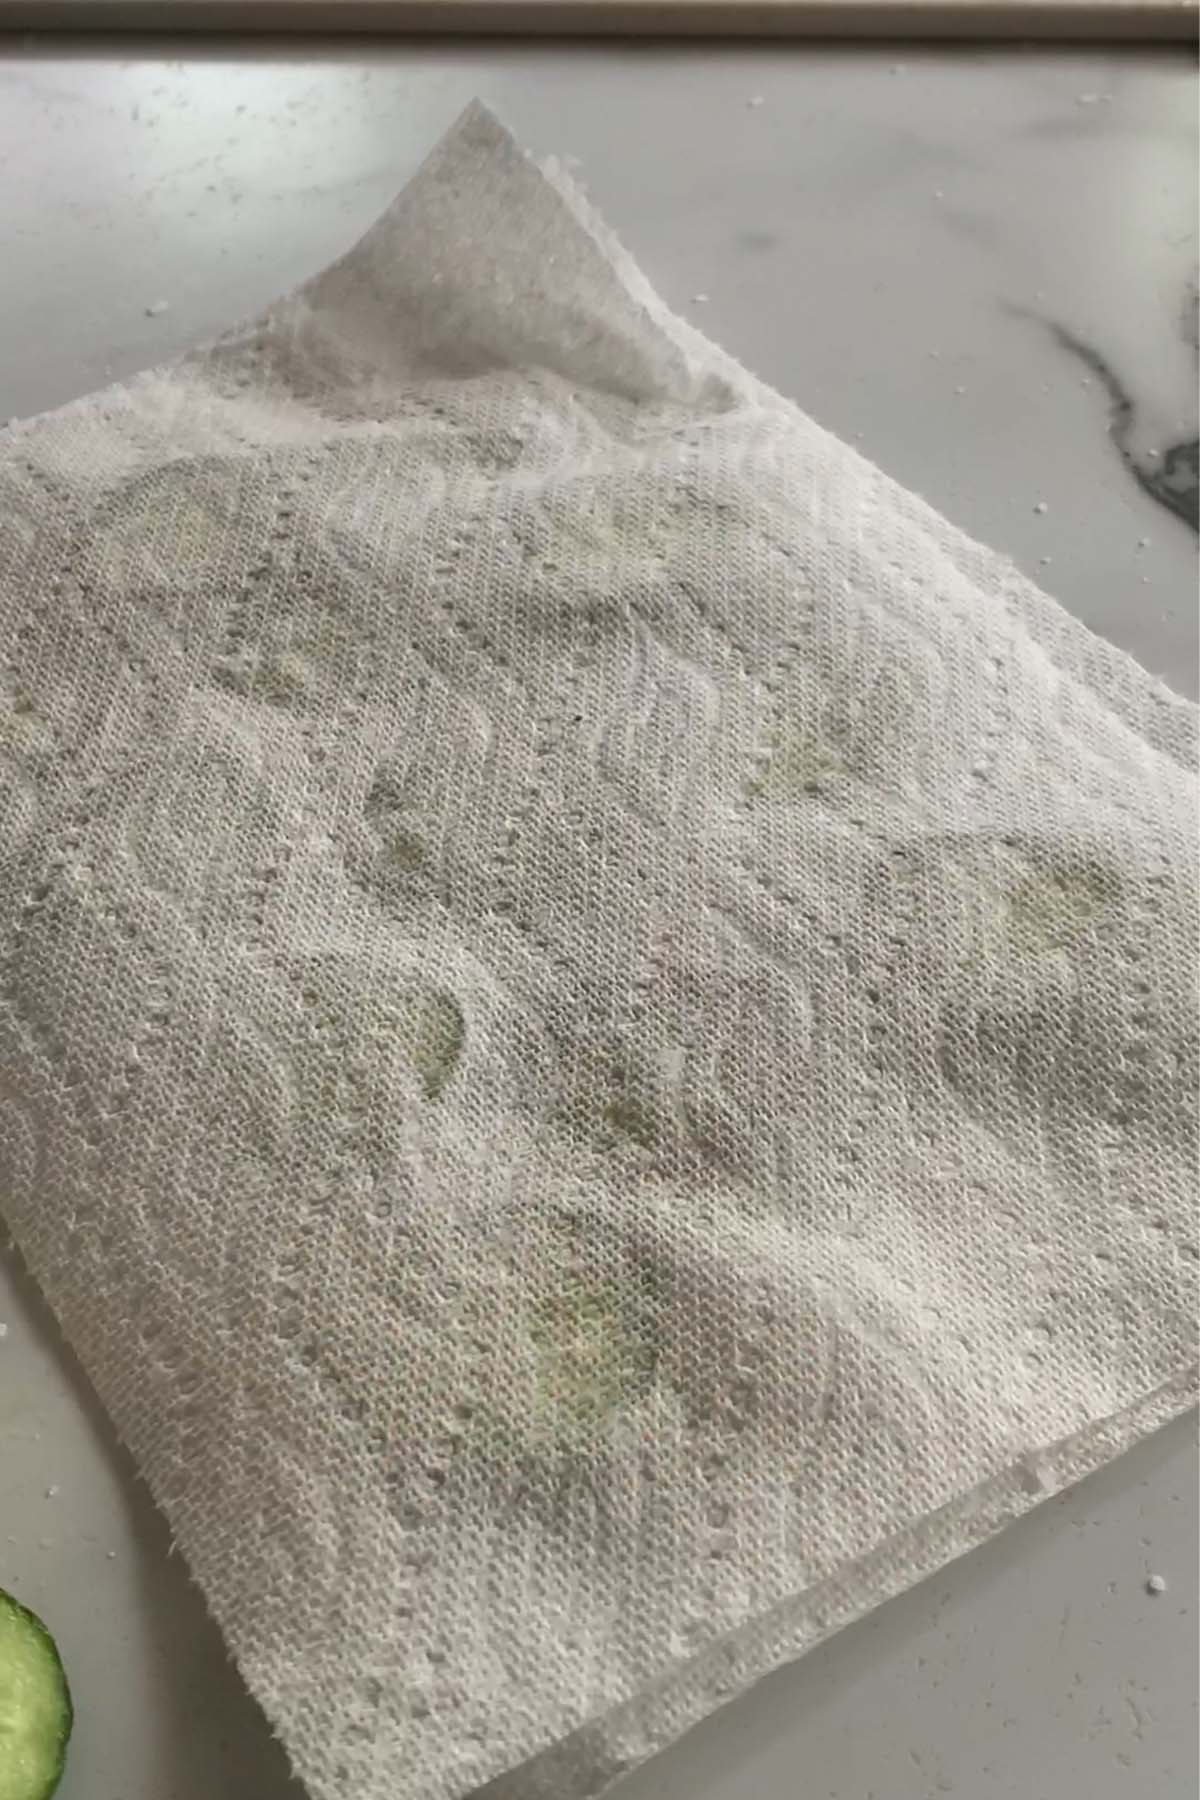 Drawing moisture out of the cucumber with salt and paper towel.